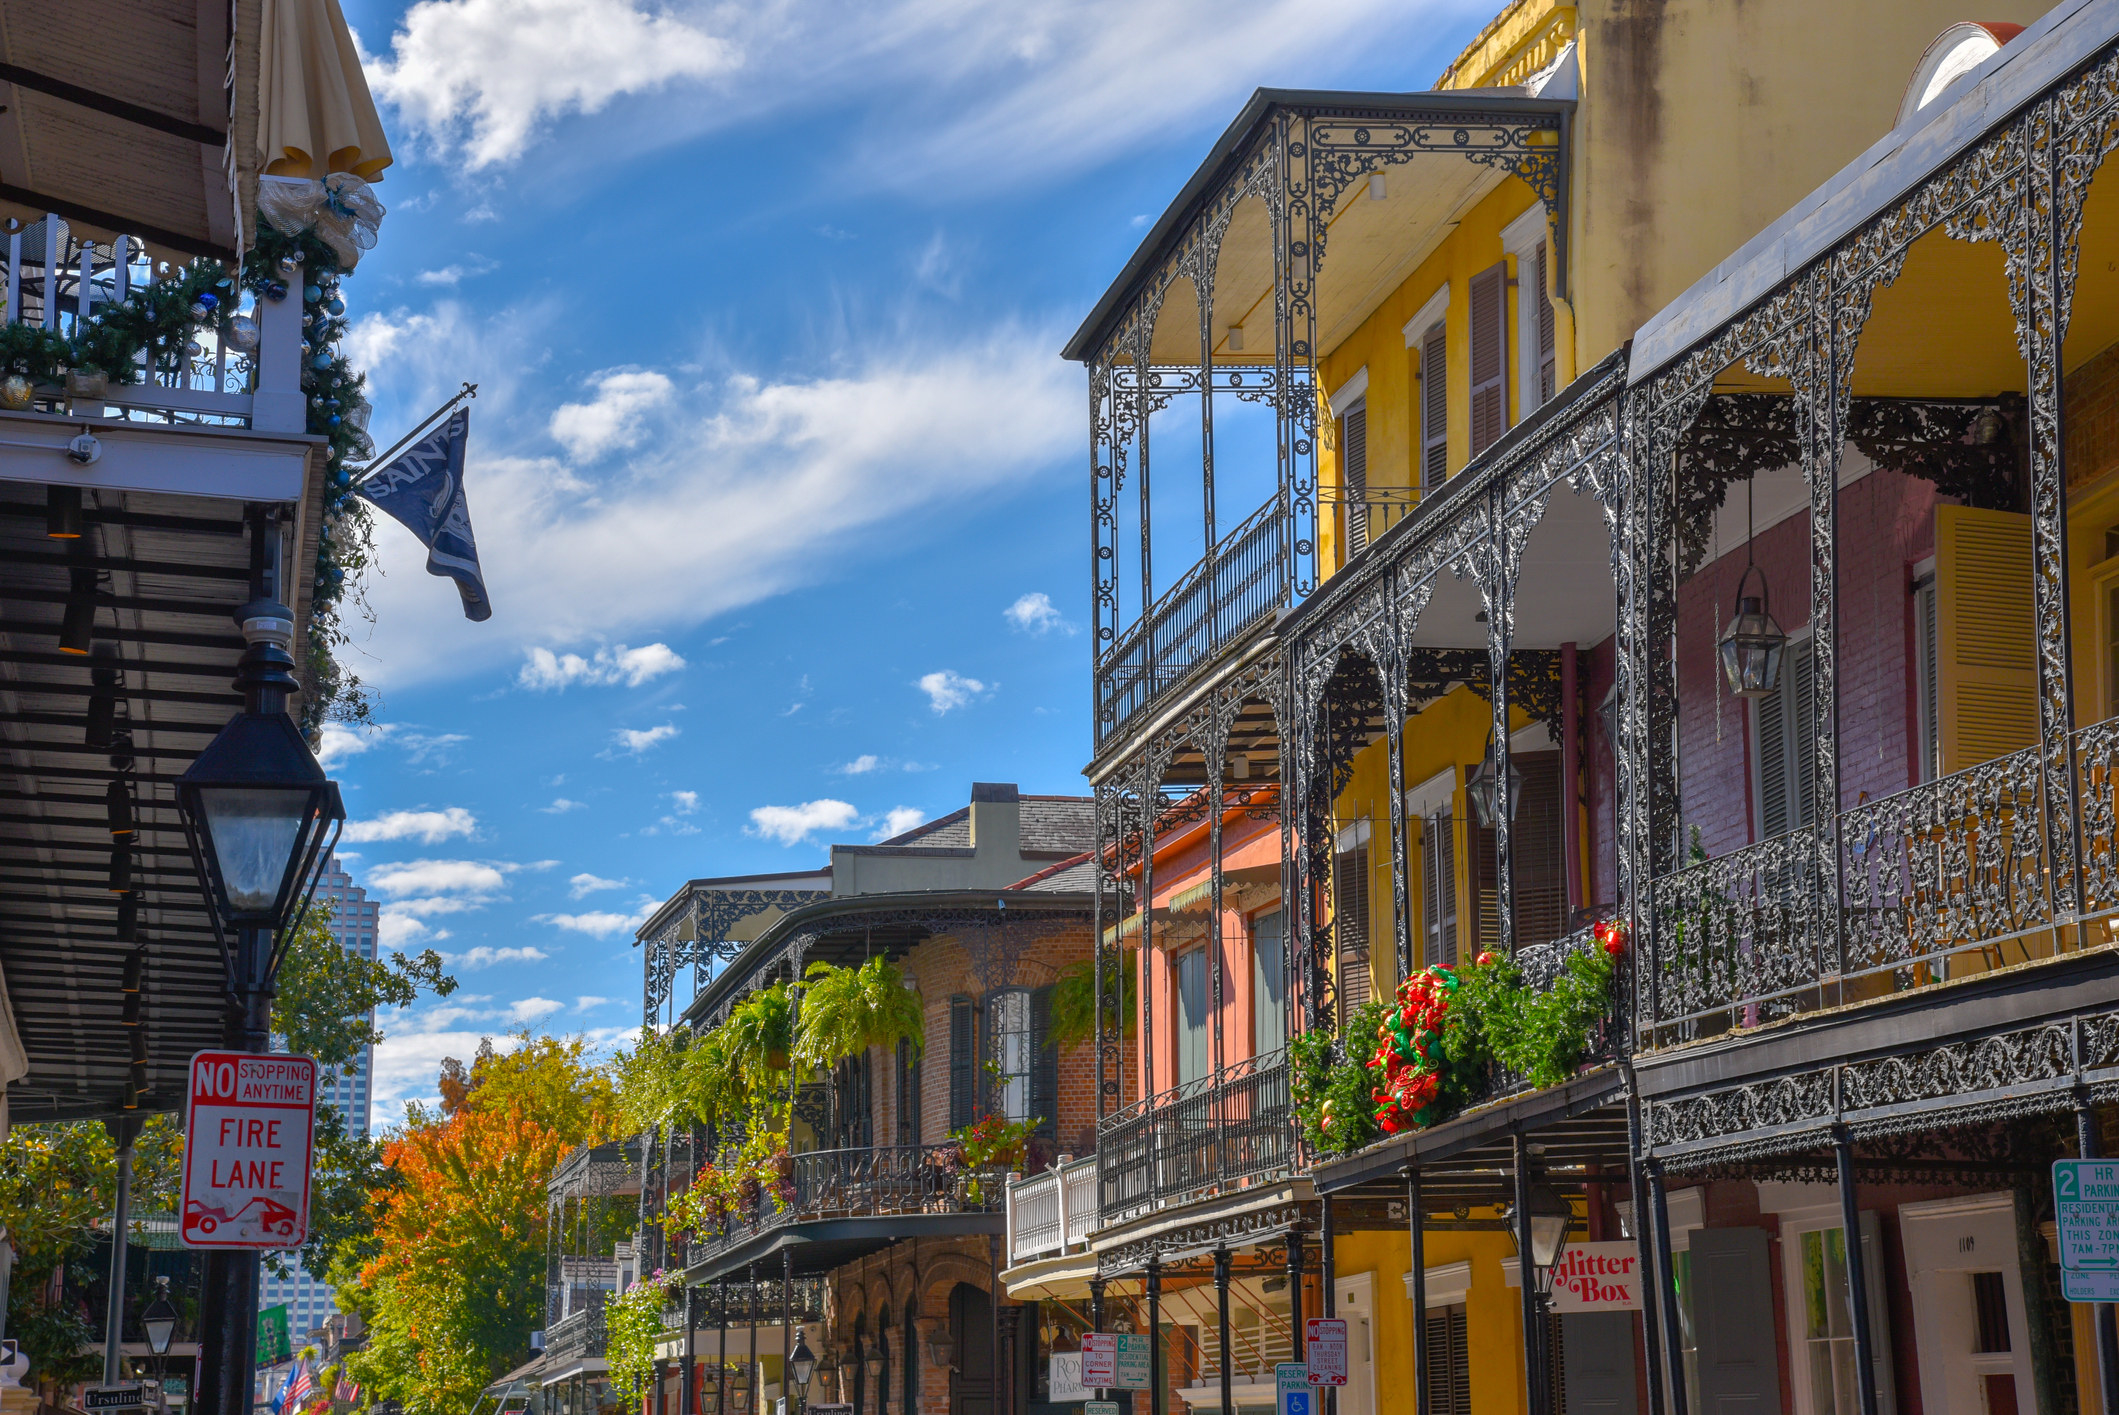 Colorful buildings in New Orleans.